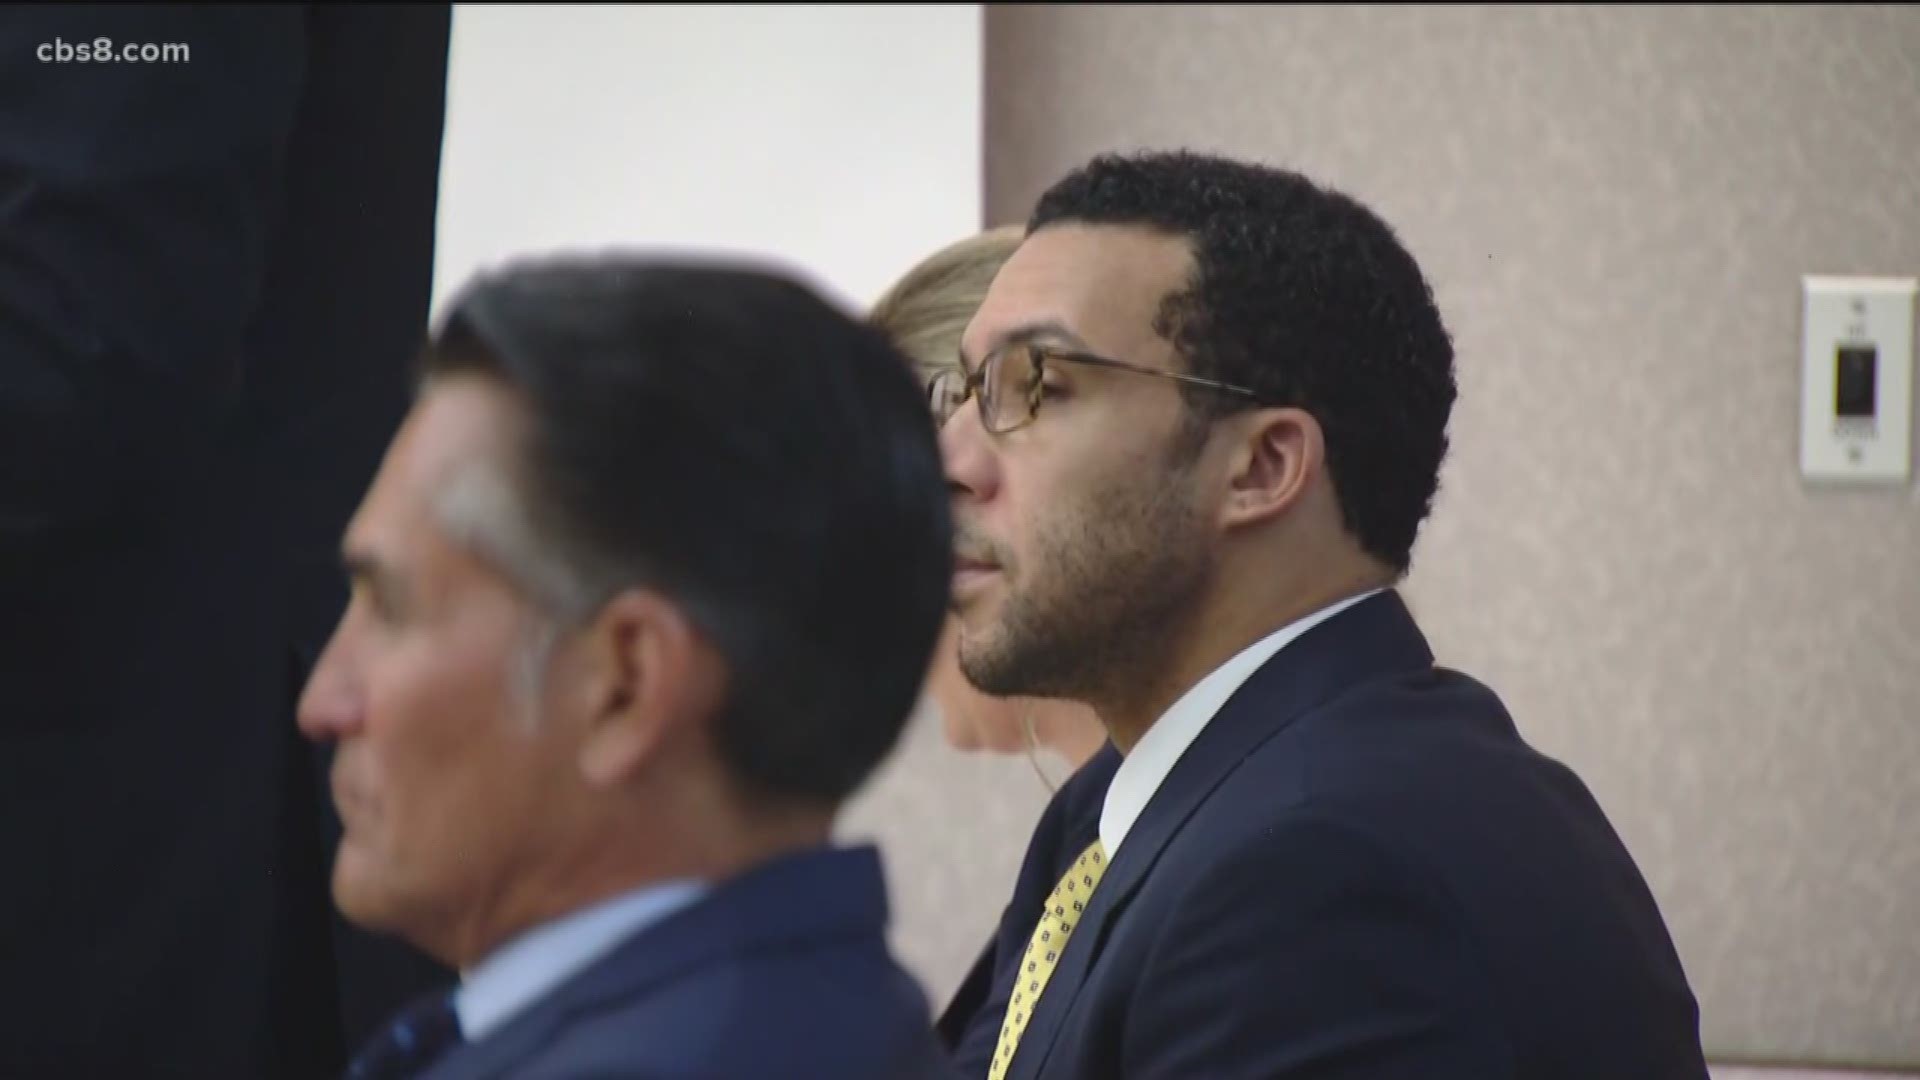 In their opening statements, prosecutors outlined the accusations leveled by each of the women Winslow is charged with raping or exposing himself to.